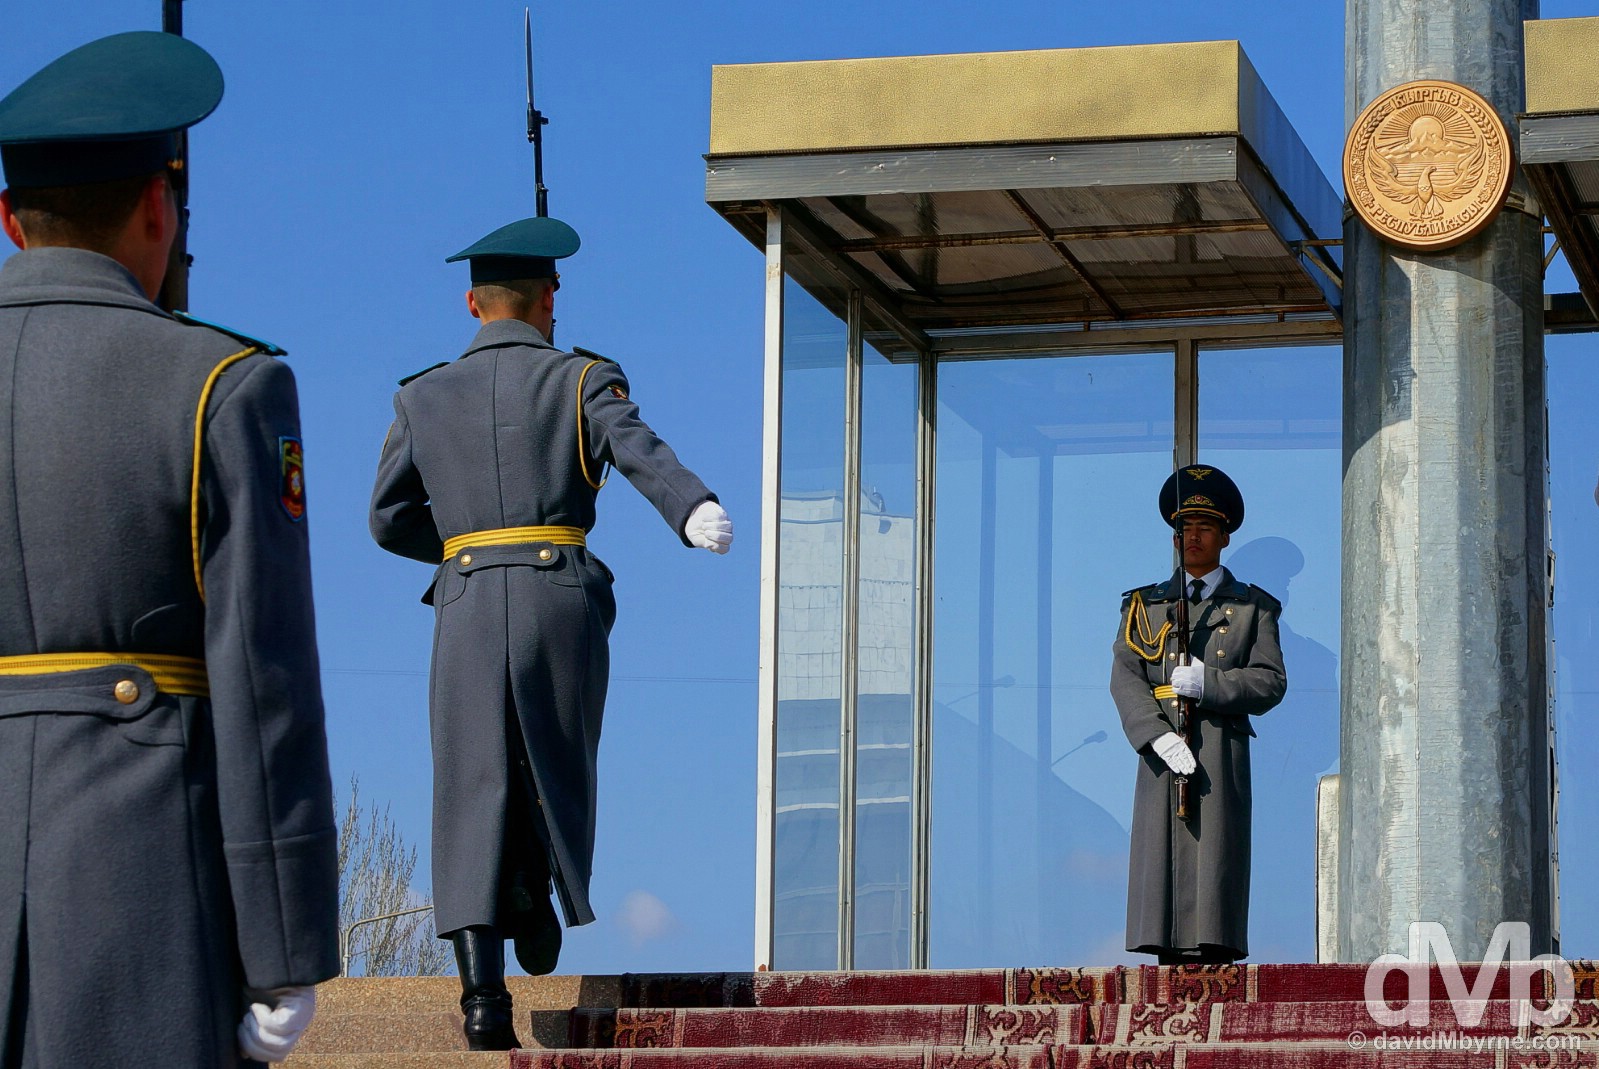 The ceremonial changing of the guard at the base of the flagpole in Ala-Too Square, central Bishkek, Kyrgyzstan. February 27, 2015.